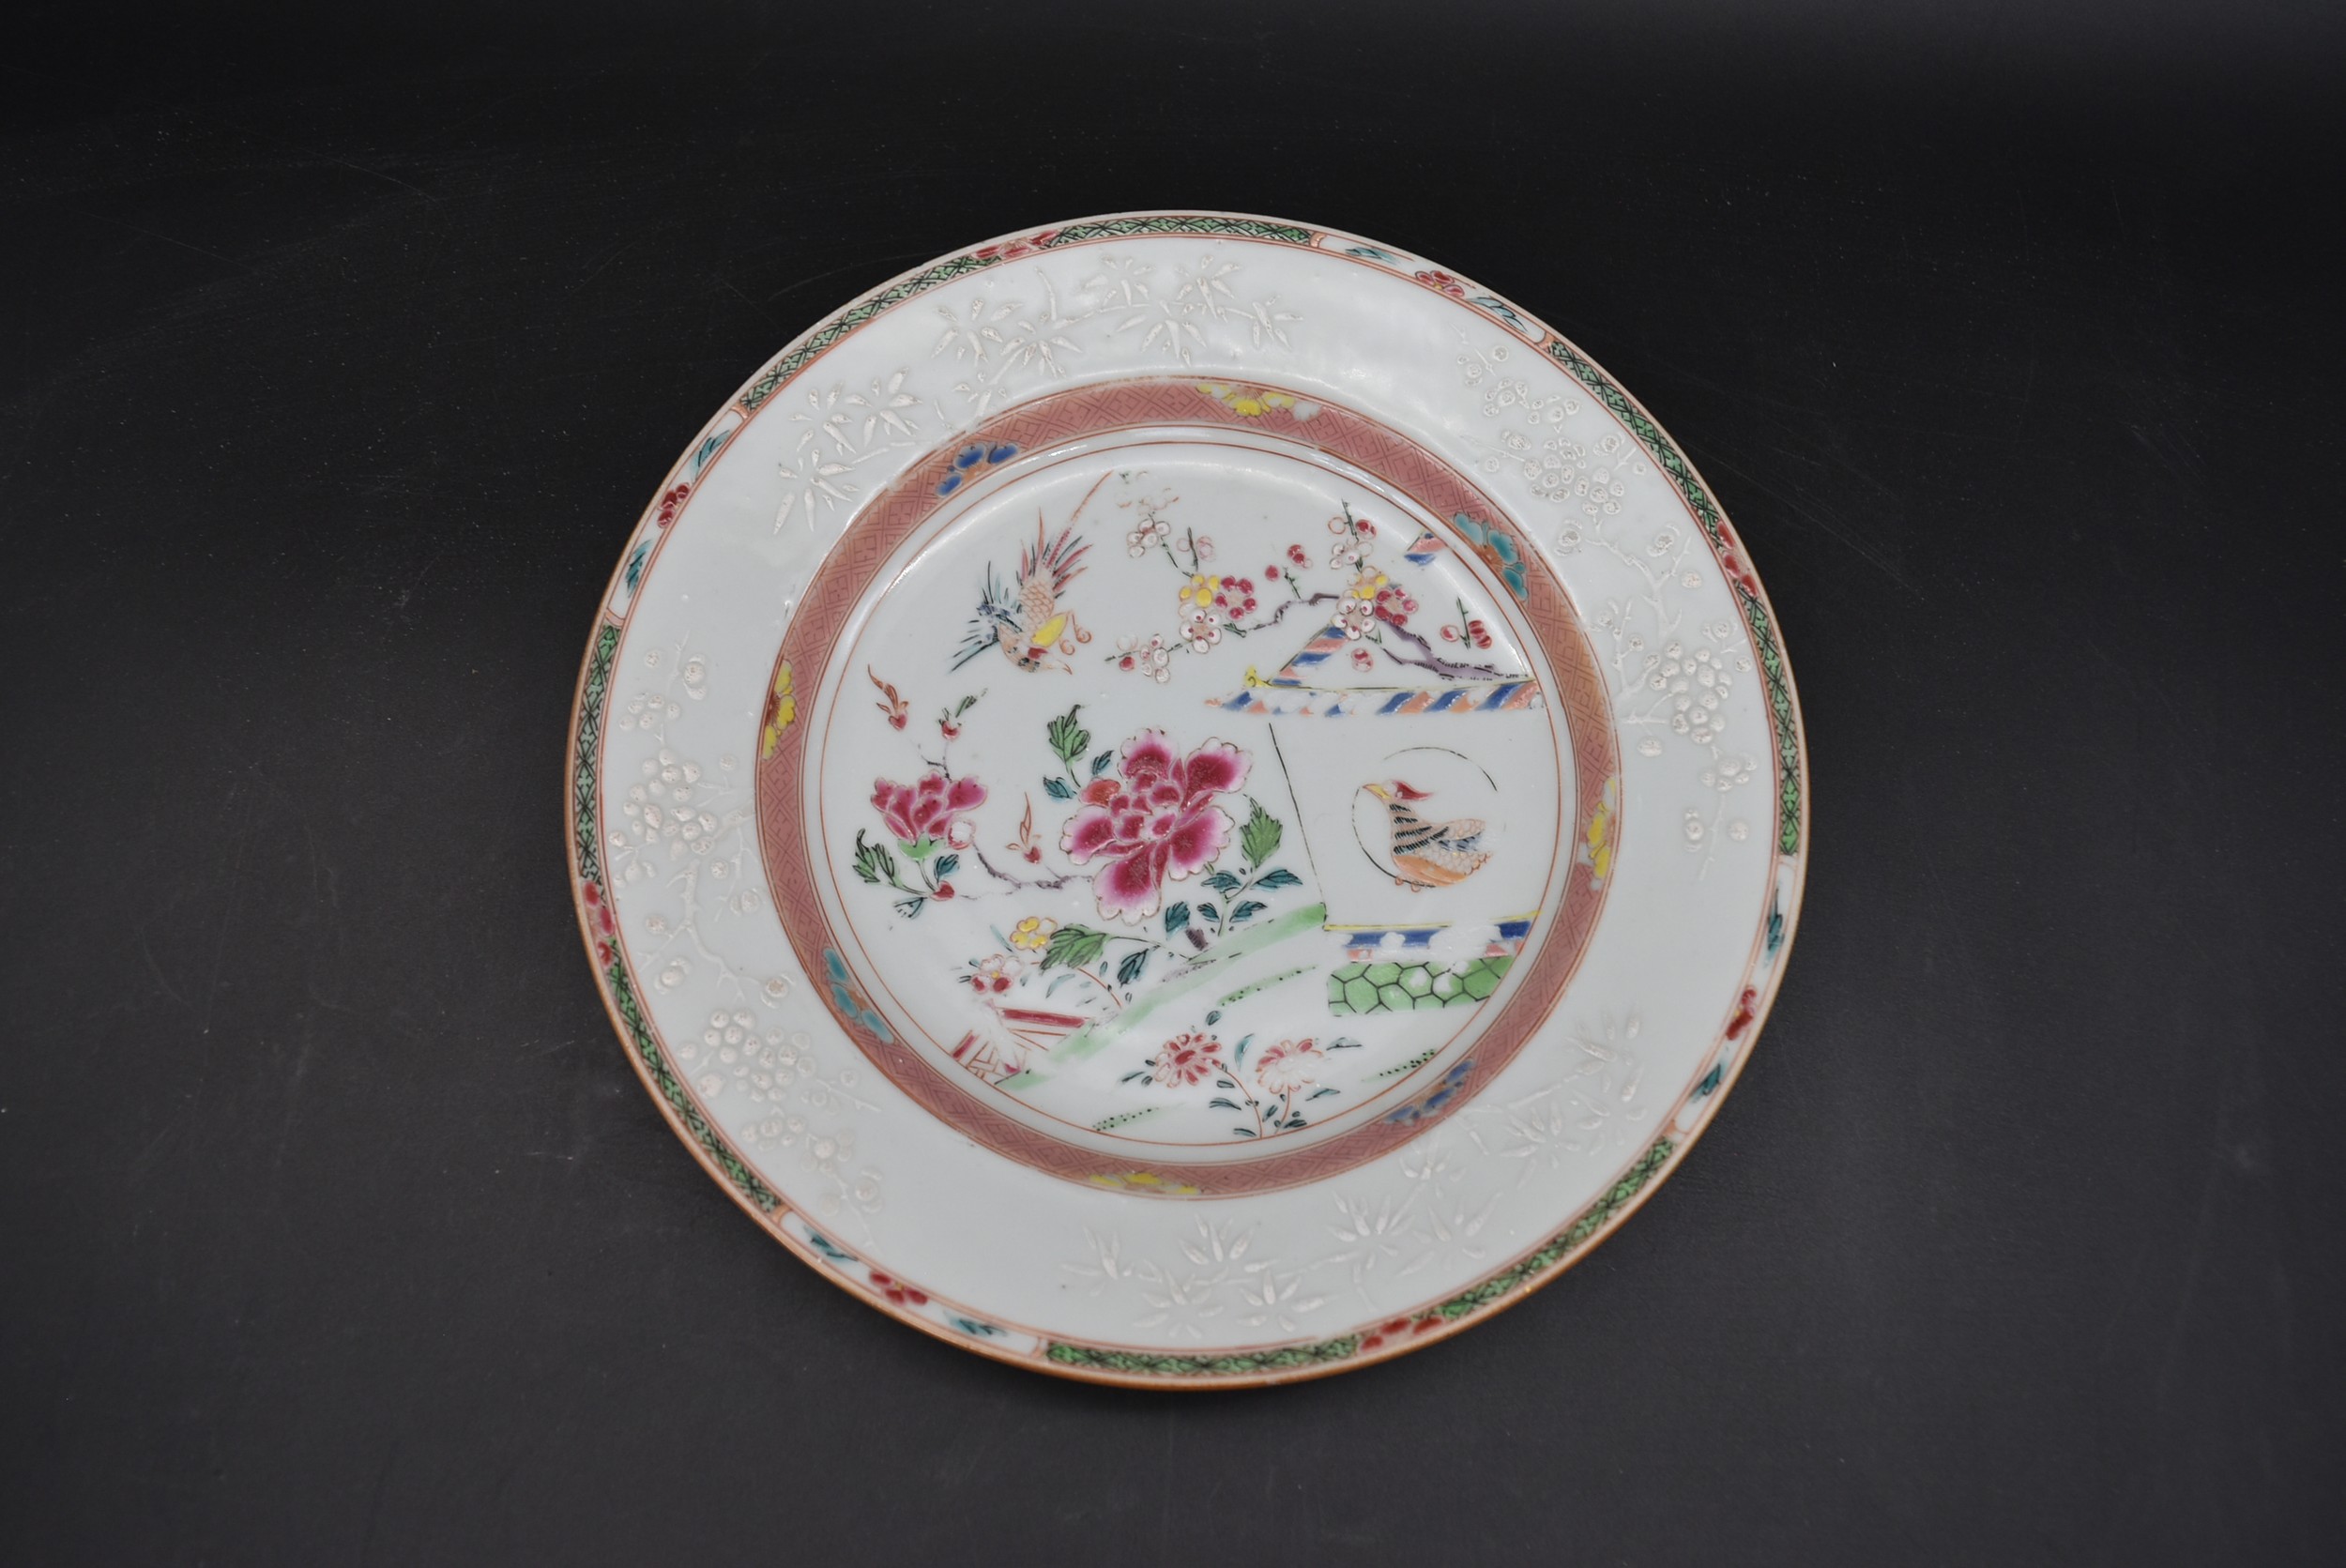 An 18th century Famille Rose Chinese glazed porcelain plate with cuckoo and house design with